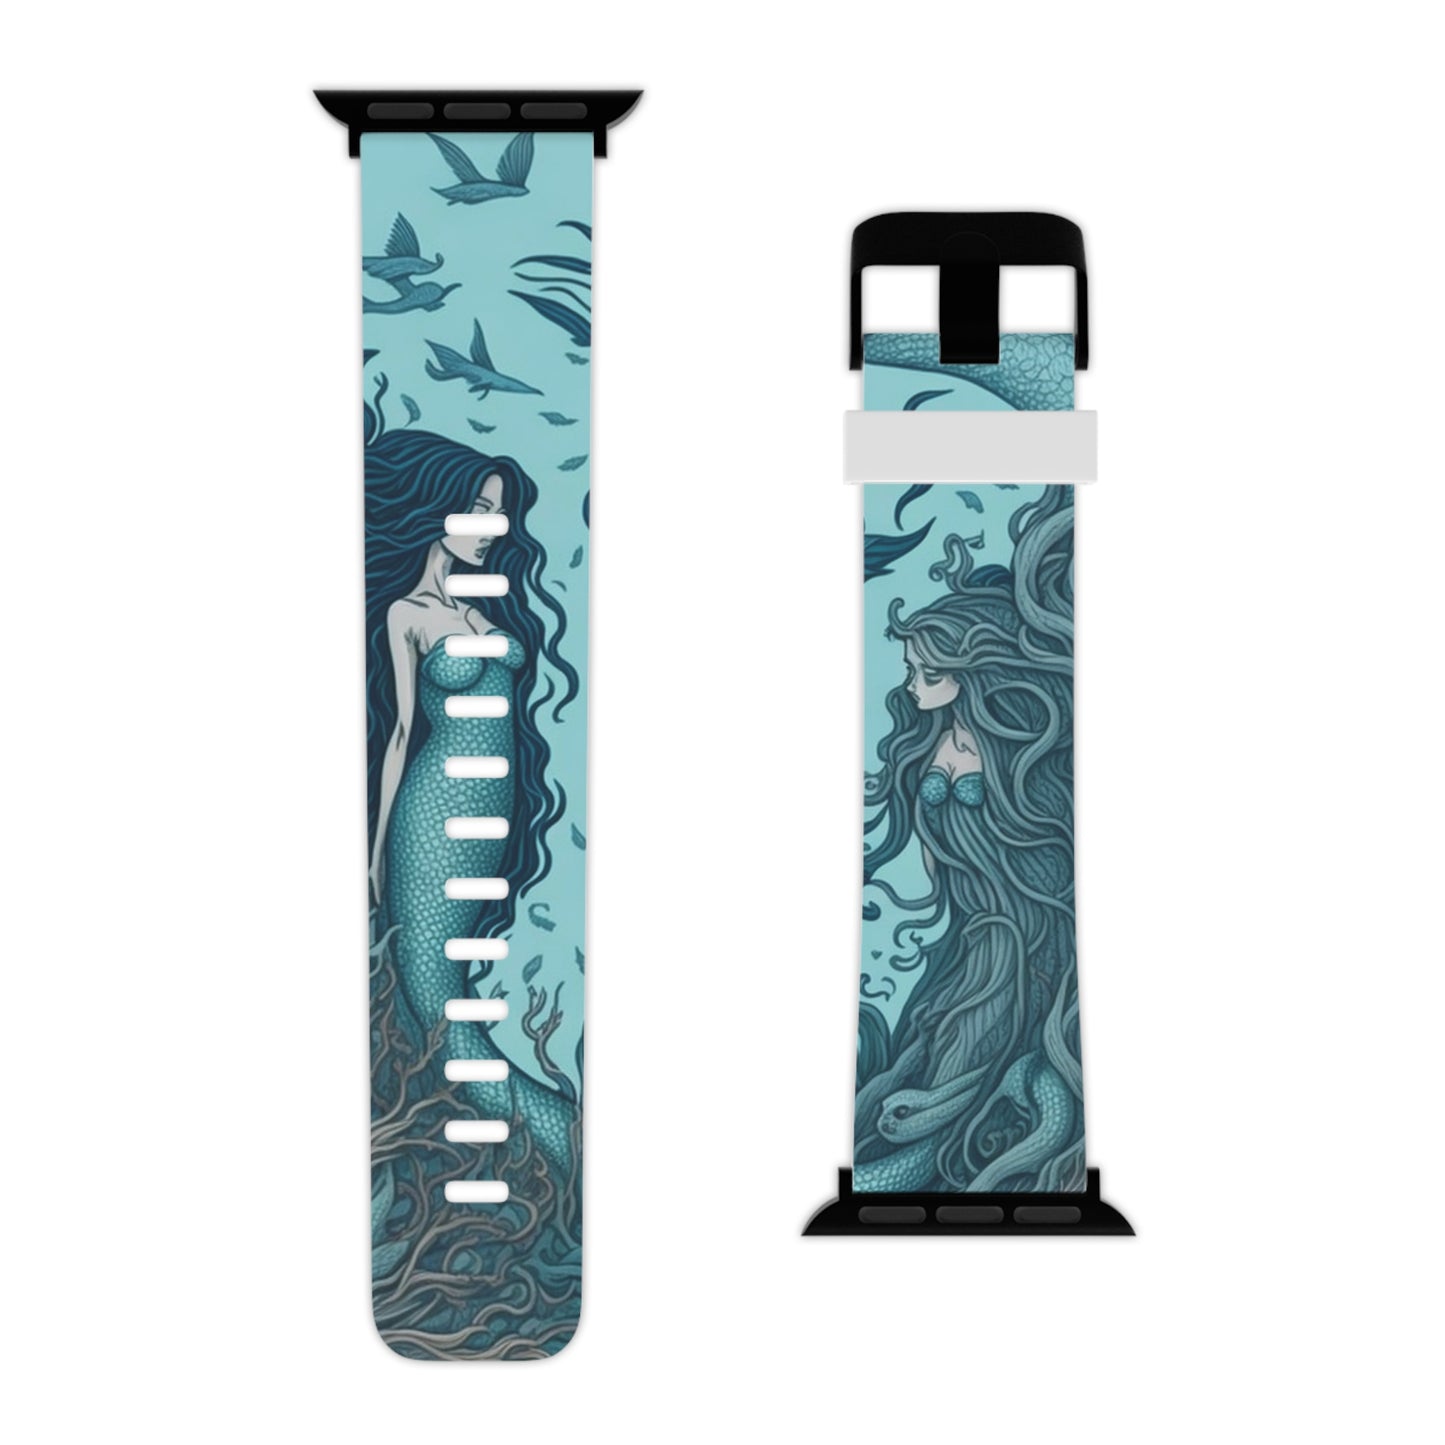 Mermaids Cove Watch Band for Apple Watch, Standard and Long Sizes available. Great gift for any sea or ocean lover. Dive, Teacher, Student